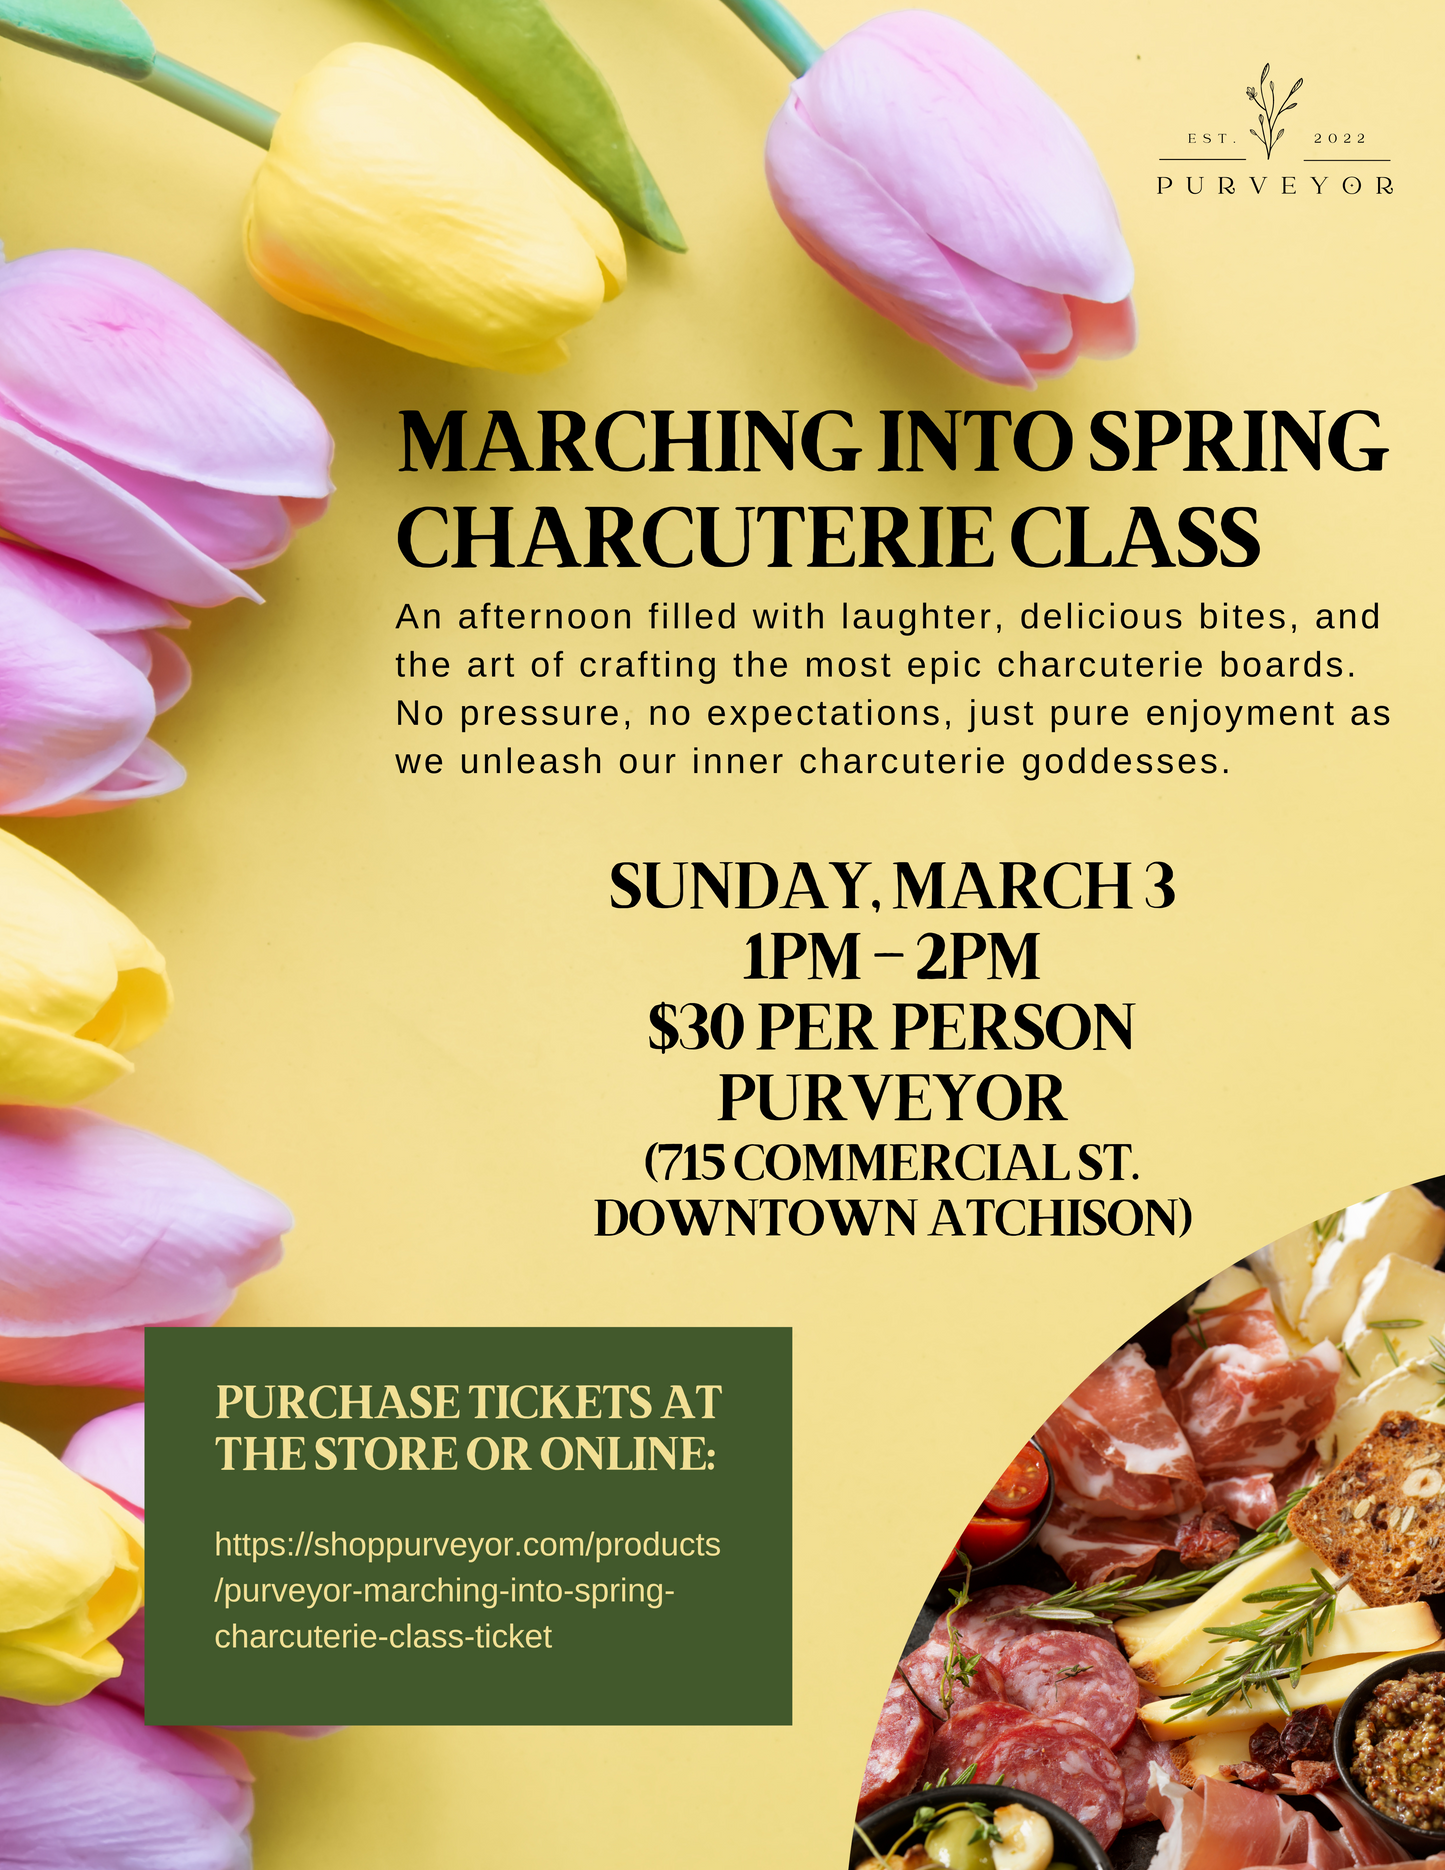 Purveyor - Marching Into Spring Charcuterie Class Ticket